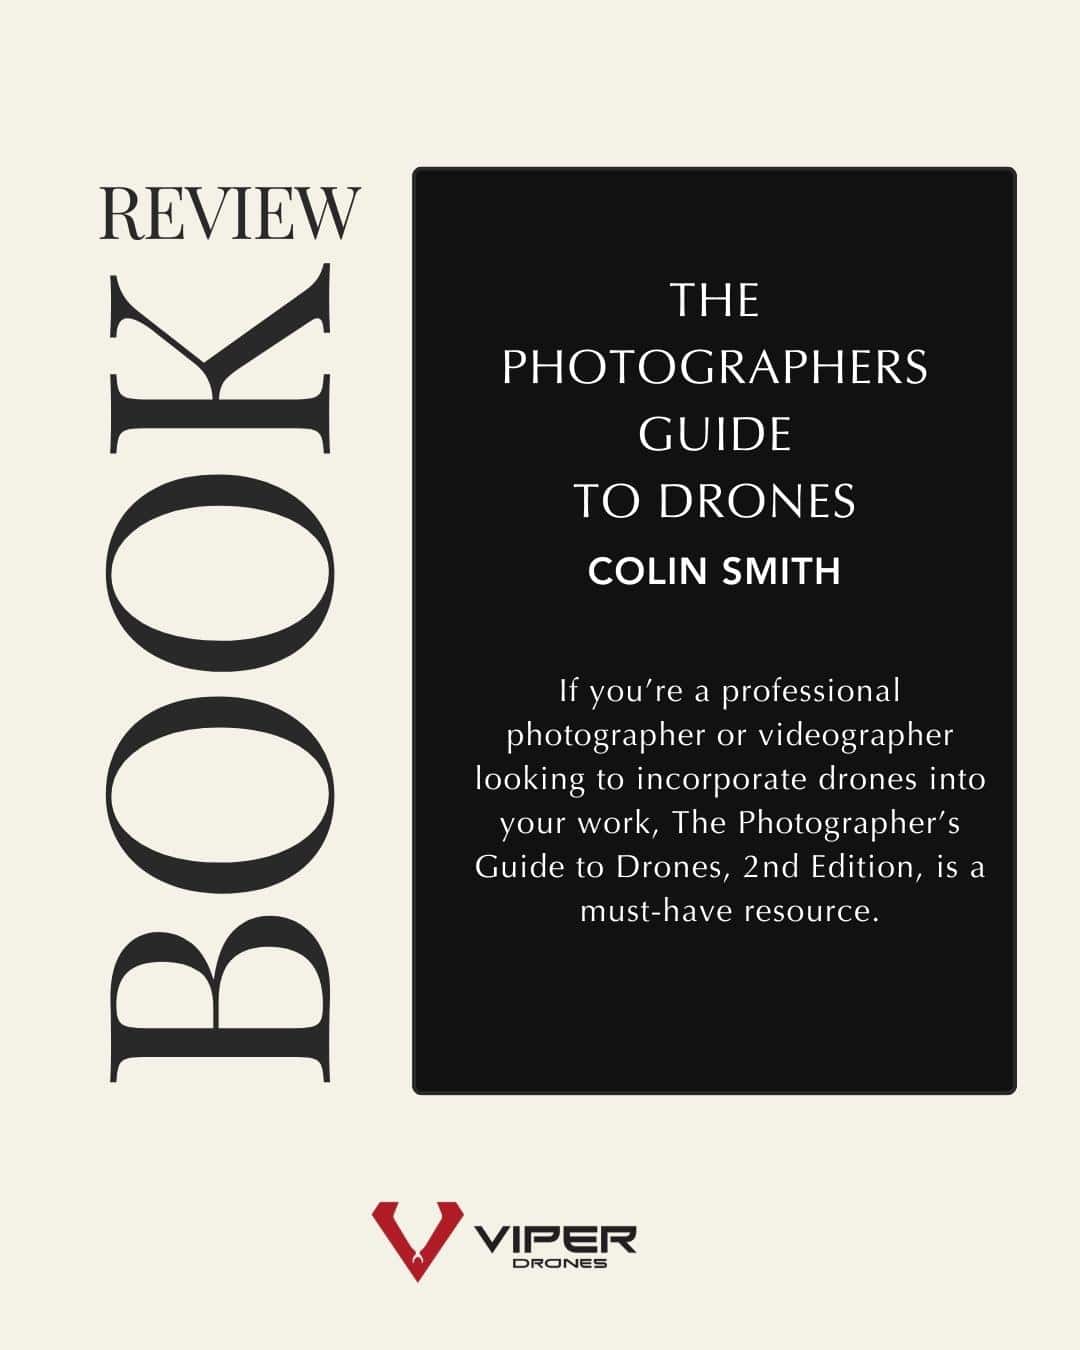 the photographers guide to drones book review text